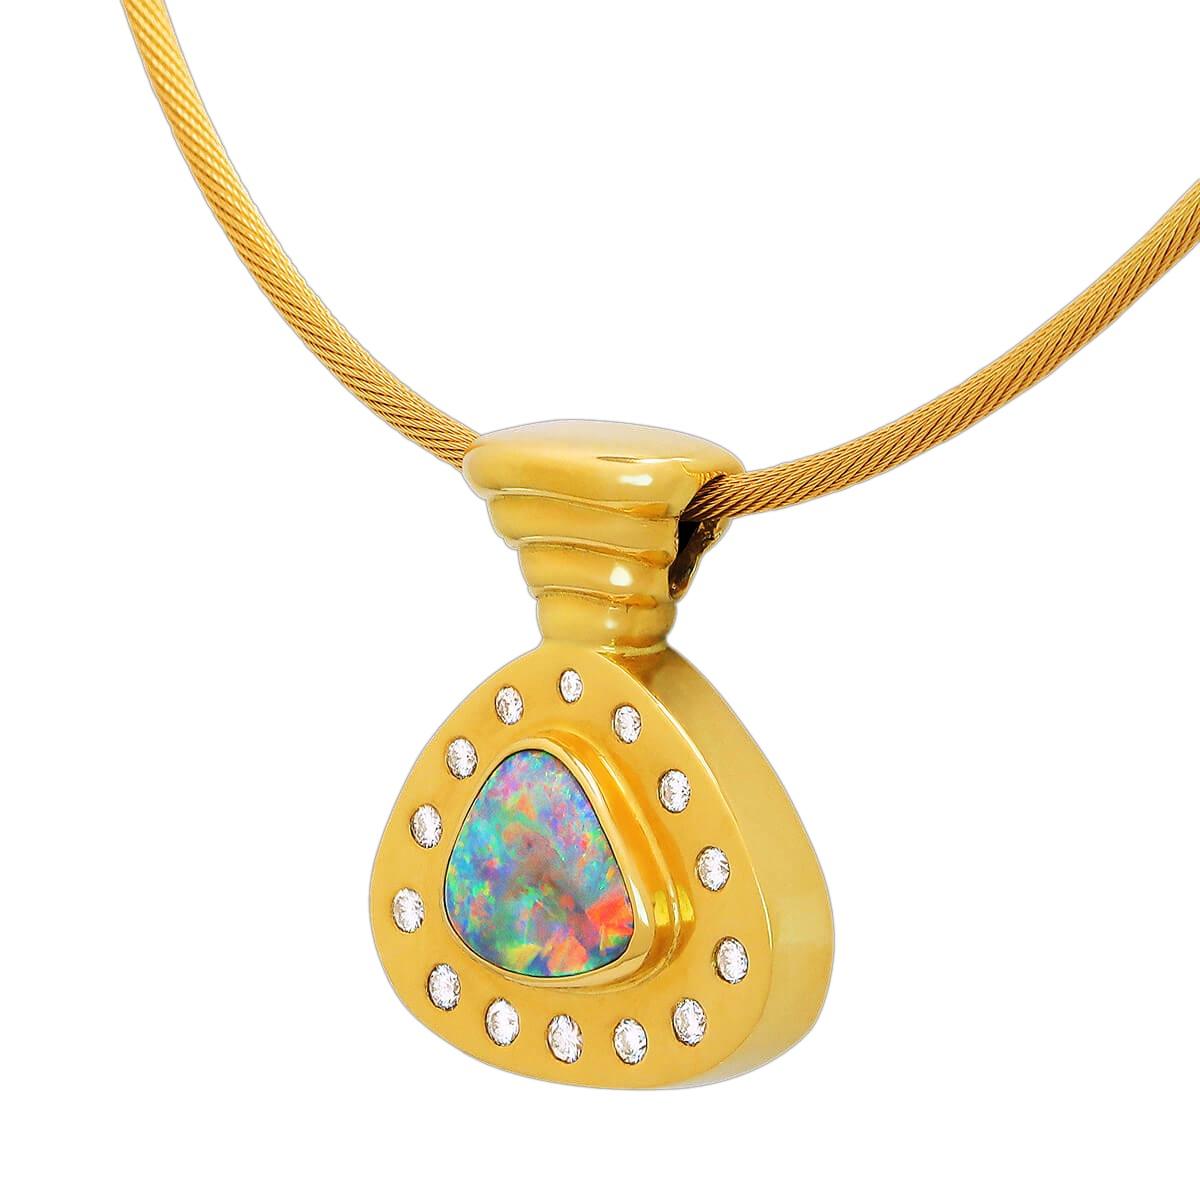 The bright opal in this piece is simply stunning. Surrounded by high jewellery grade diamonds and set in solid 18K yellow gold, it makes the opal pop with all its colourful glory. The cable chain is also solid 18K gold and the perfect accompaniment